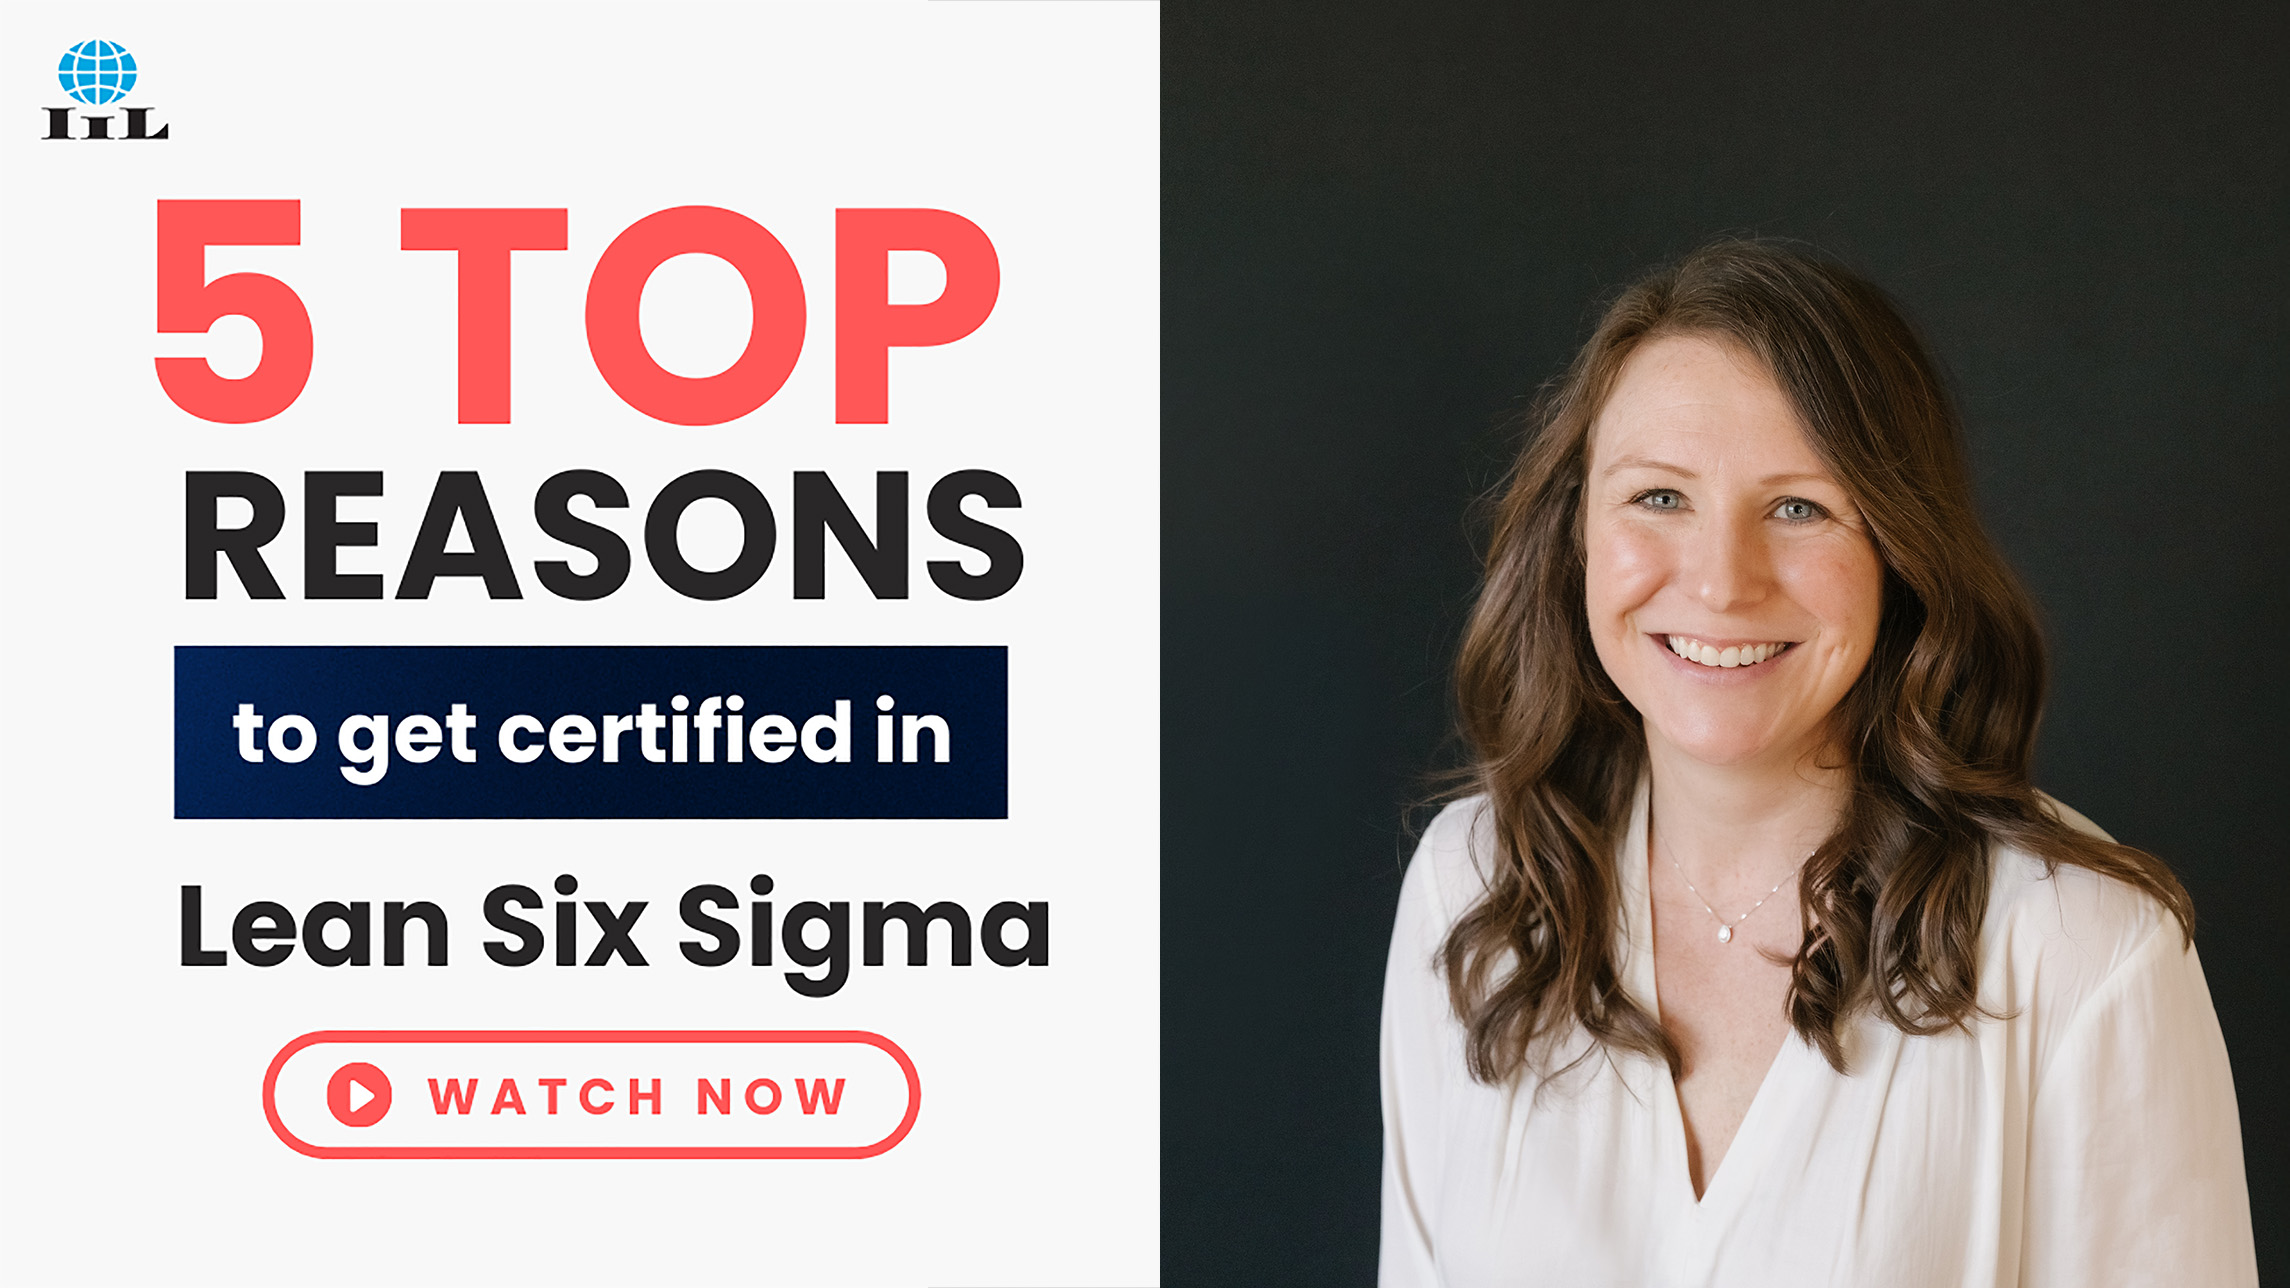 5 Top Reasons to Get Certified in Lean Six Sigma